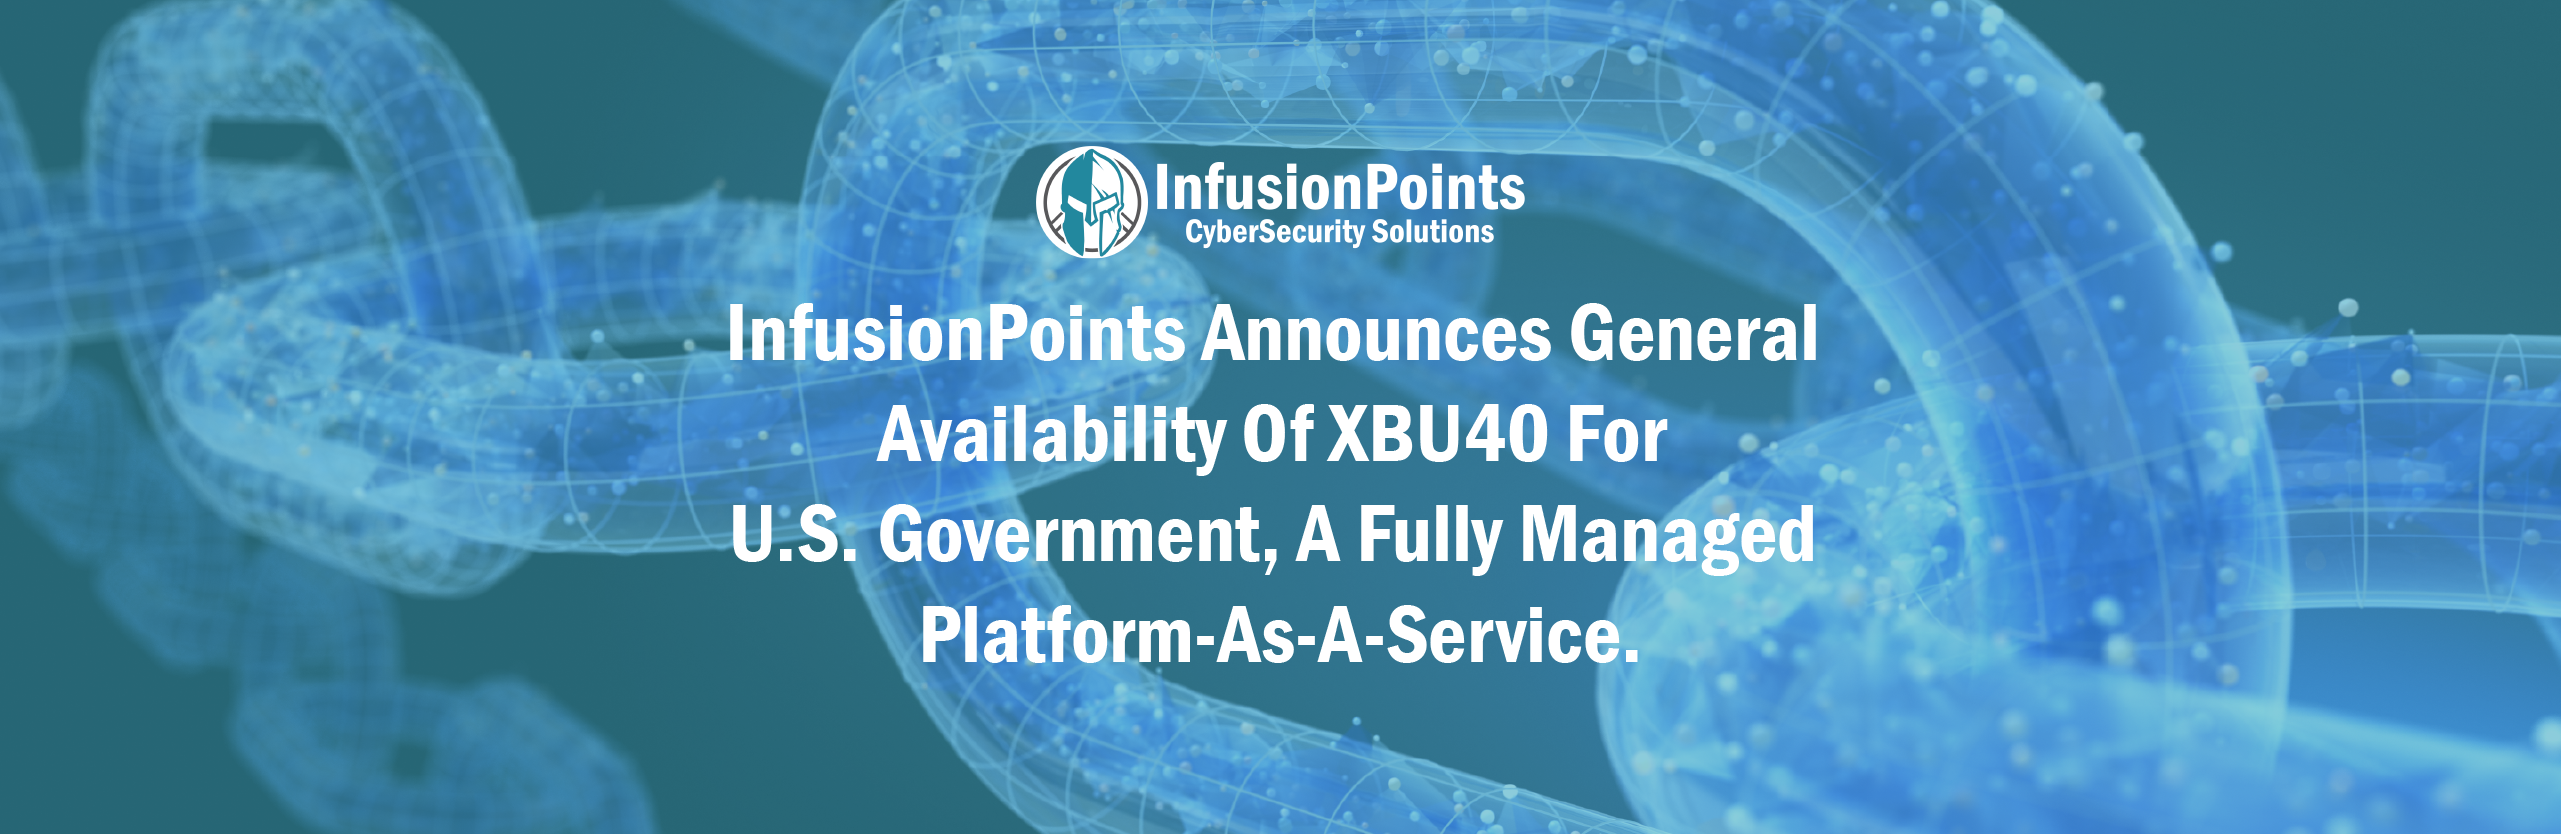 InfusionPoints Announces General Availability Of XBU40 For U.S. Government, A Fully Managed Platform-As-A-Service.